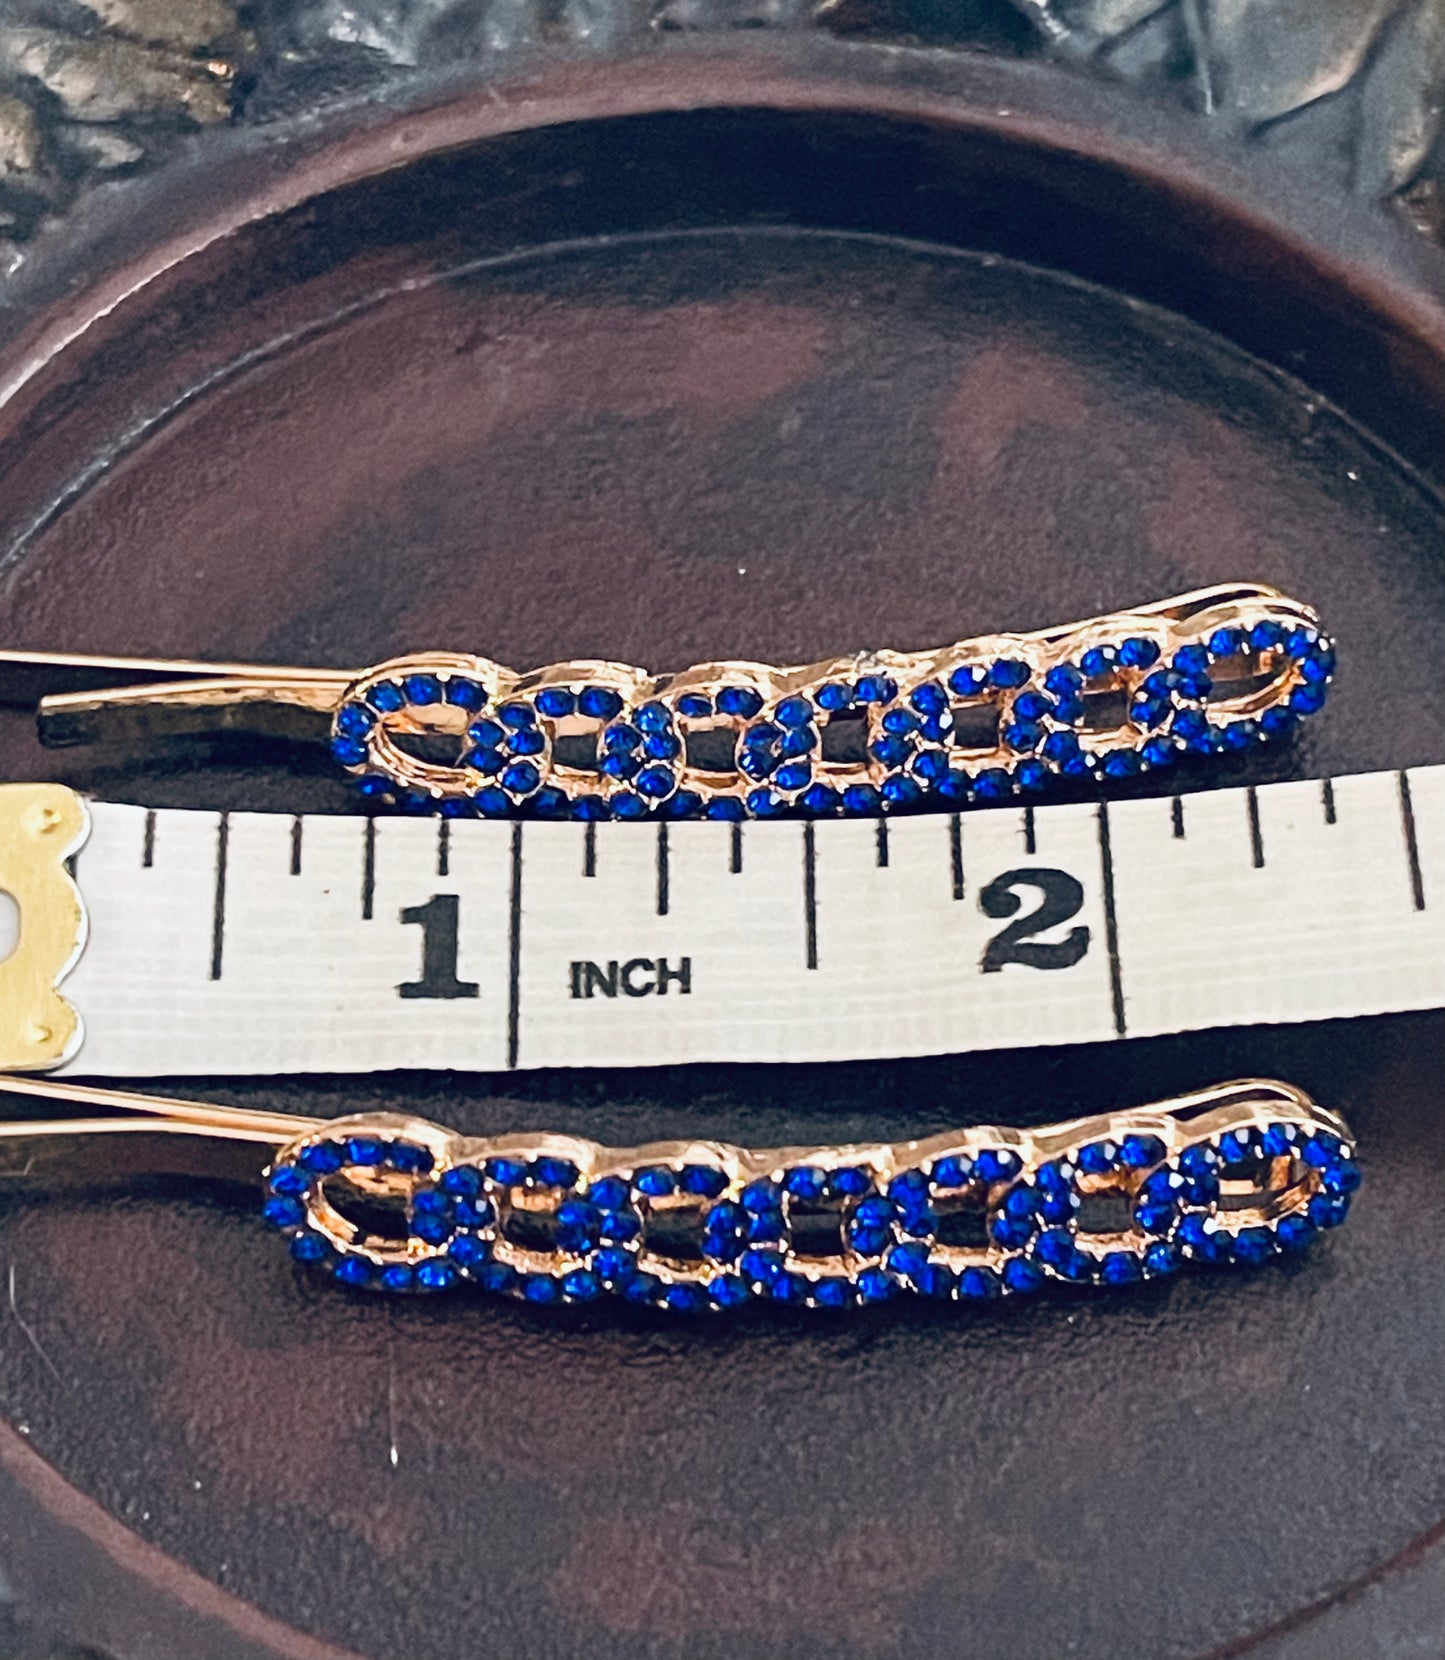 Blue Crystal rhinestone hairpins 2pc approximately 2.5”gold tone  formal hair accessories gift wedding bridesmaid princess accessory